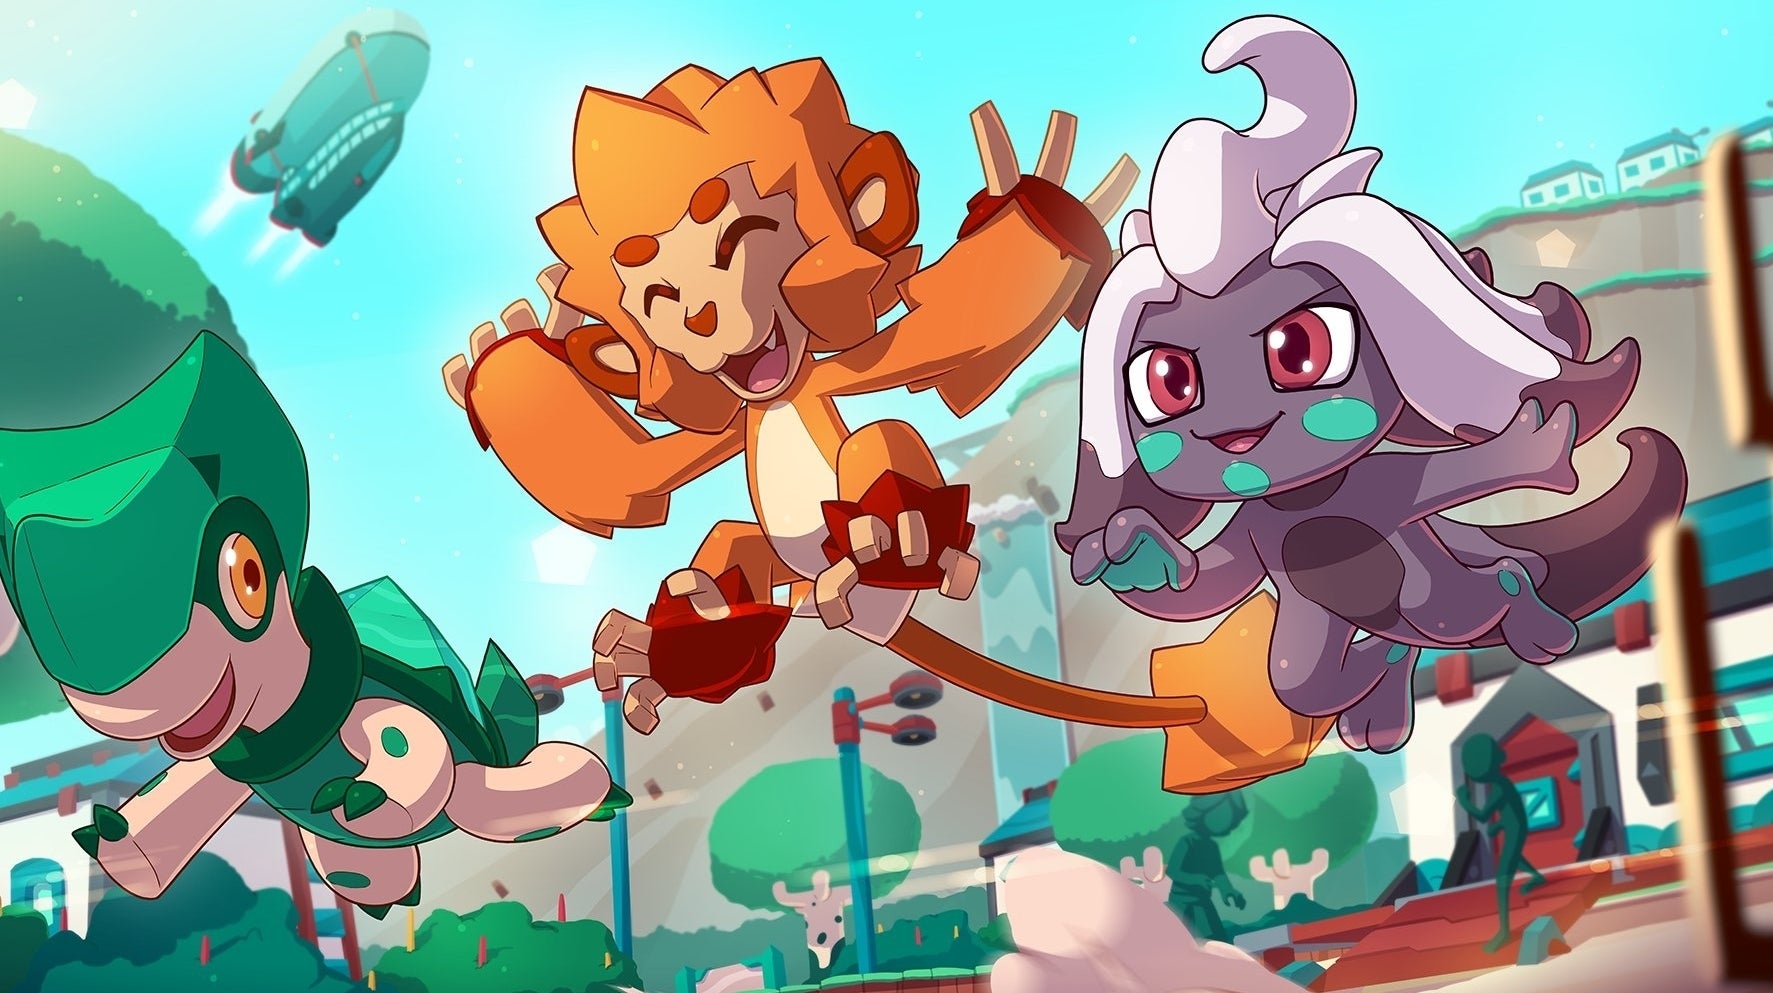 Image for Pokémon-like MMO Temtem's new early access roadmap adds player housing, more